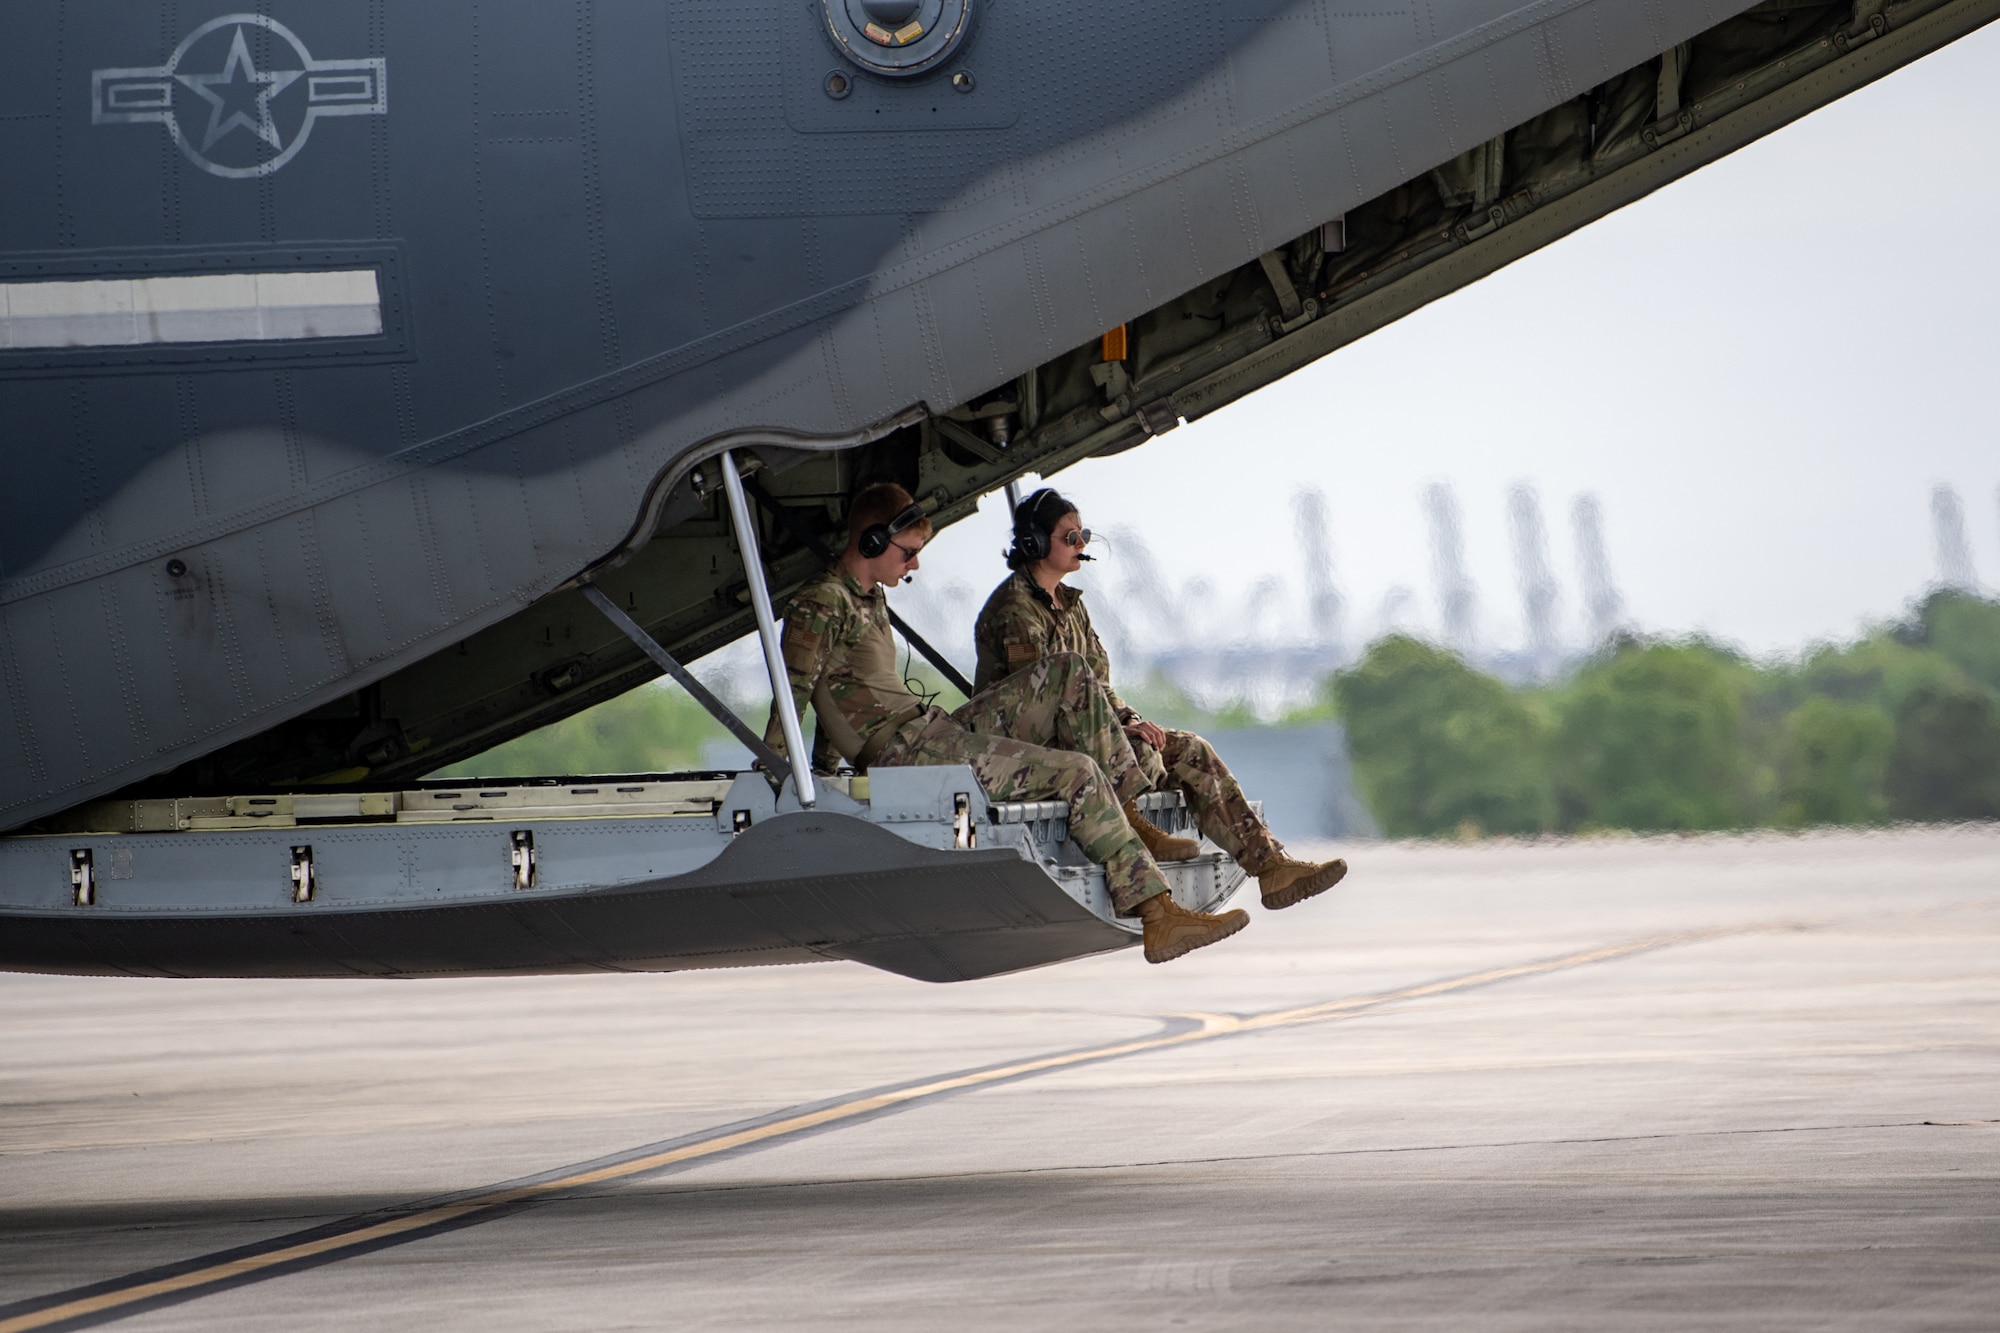 U.S. Air Force Airman 1st Class Blake Daggy and Senior Airman Sierra Orozco, 71st Rescue Squadron loadmasters, sit on the ramp of an HC-130J Combat King II during Exercise Ready Tiger 24-1 at Savannah Air National Guard Base, Georgia, April 10, 2024. Ready Tiger 24-1 is a readiness exercise demonstrating the 23rd Wing’s ability to plan, prepare and execute operations and maintenance to project air power in contested and dispersed locations, defending the United States’ interests and allies. (U.S. Air Force photo by Senior Airman Courtney Sebastianelli)